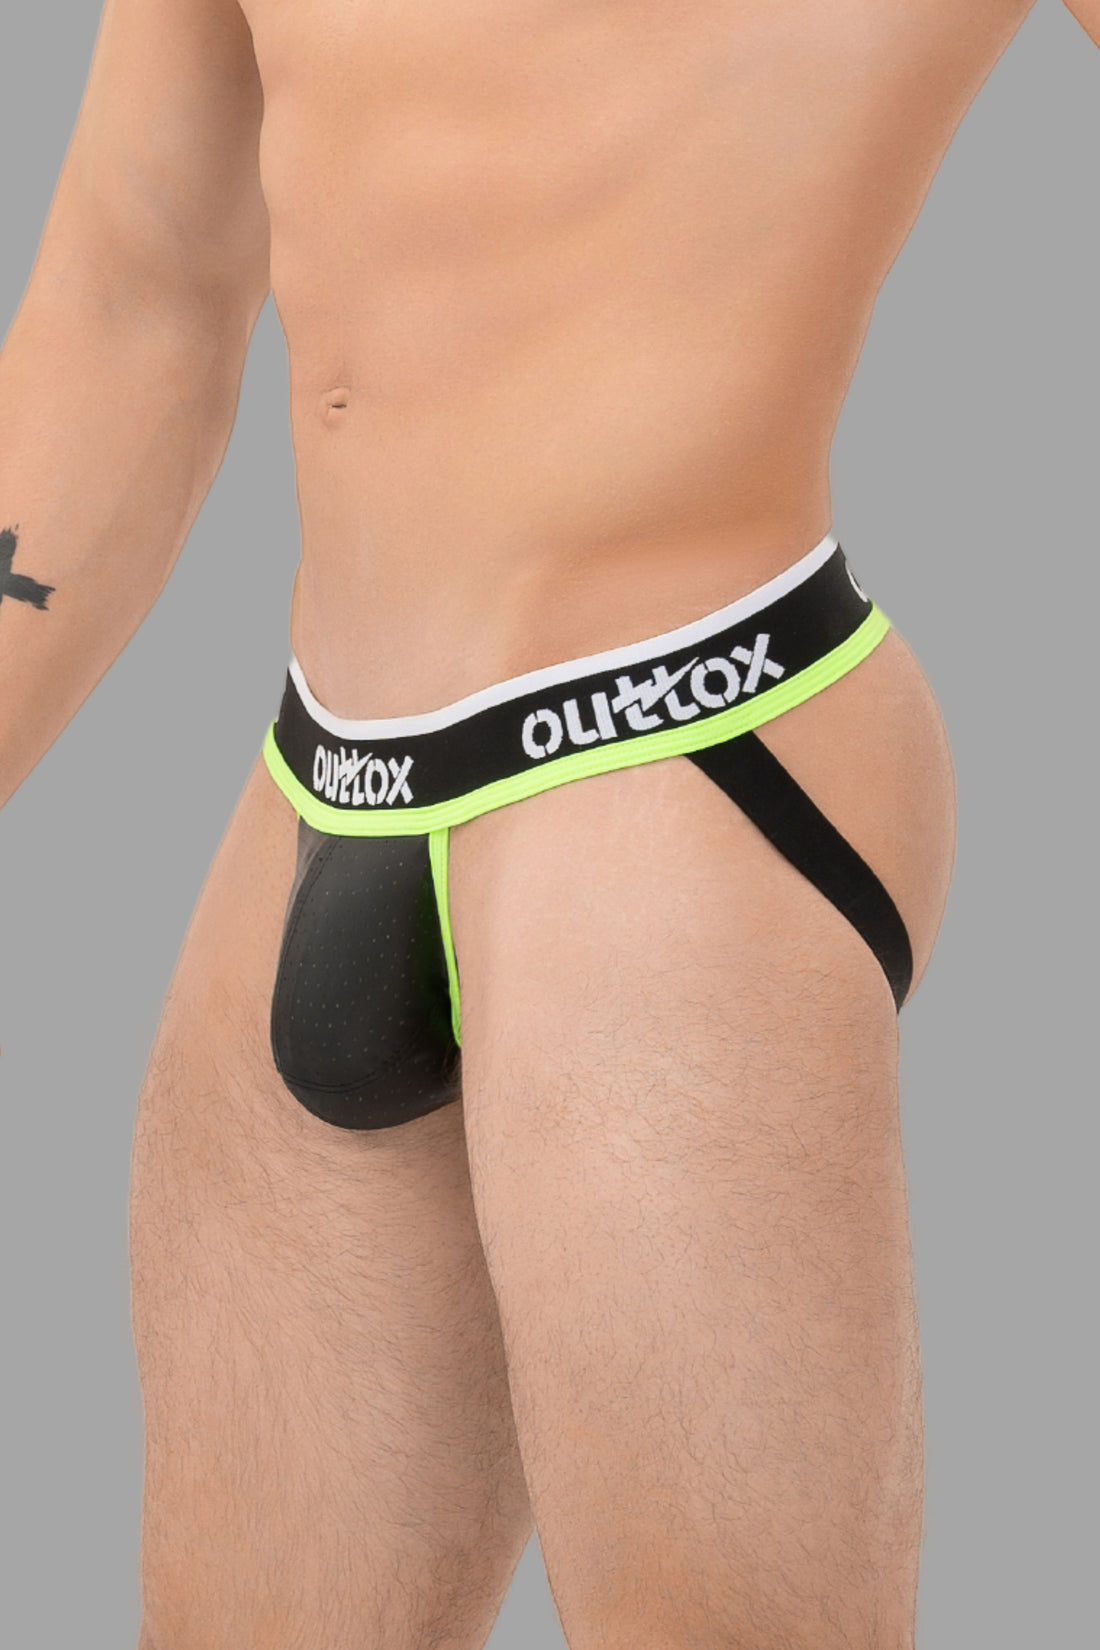 Outtox. Jock with Snap Codpiece. Black+Green &